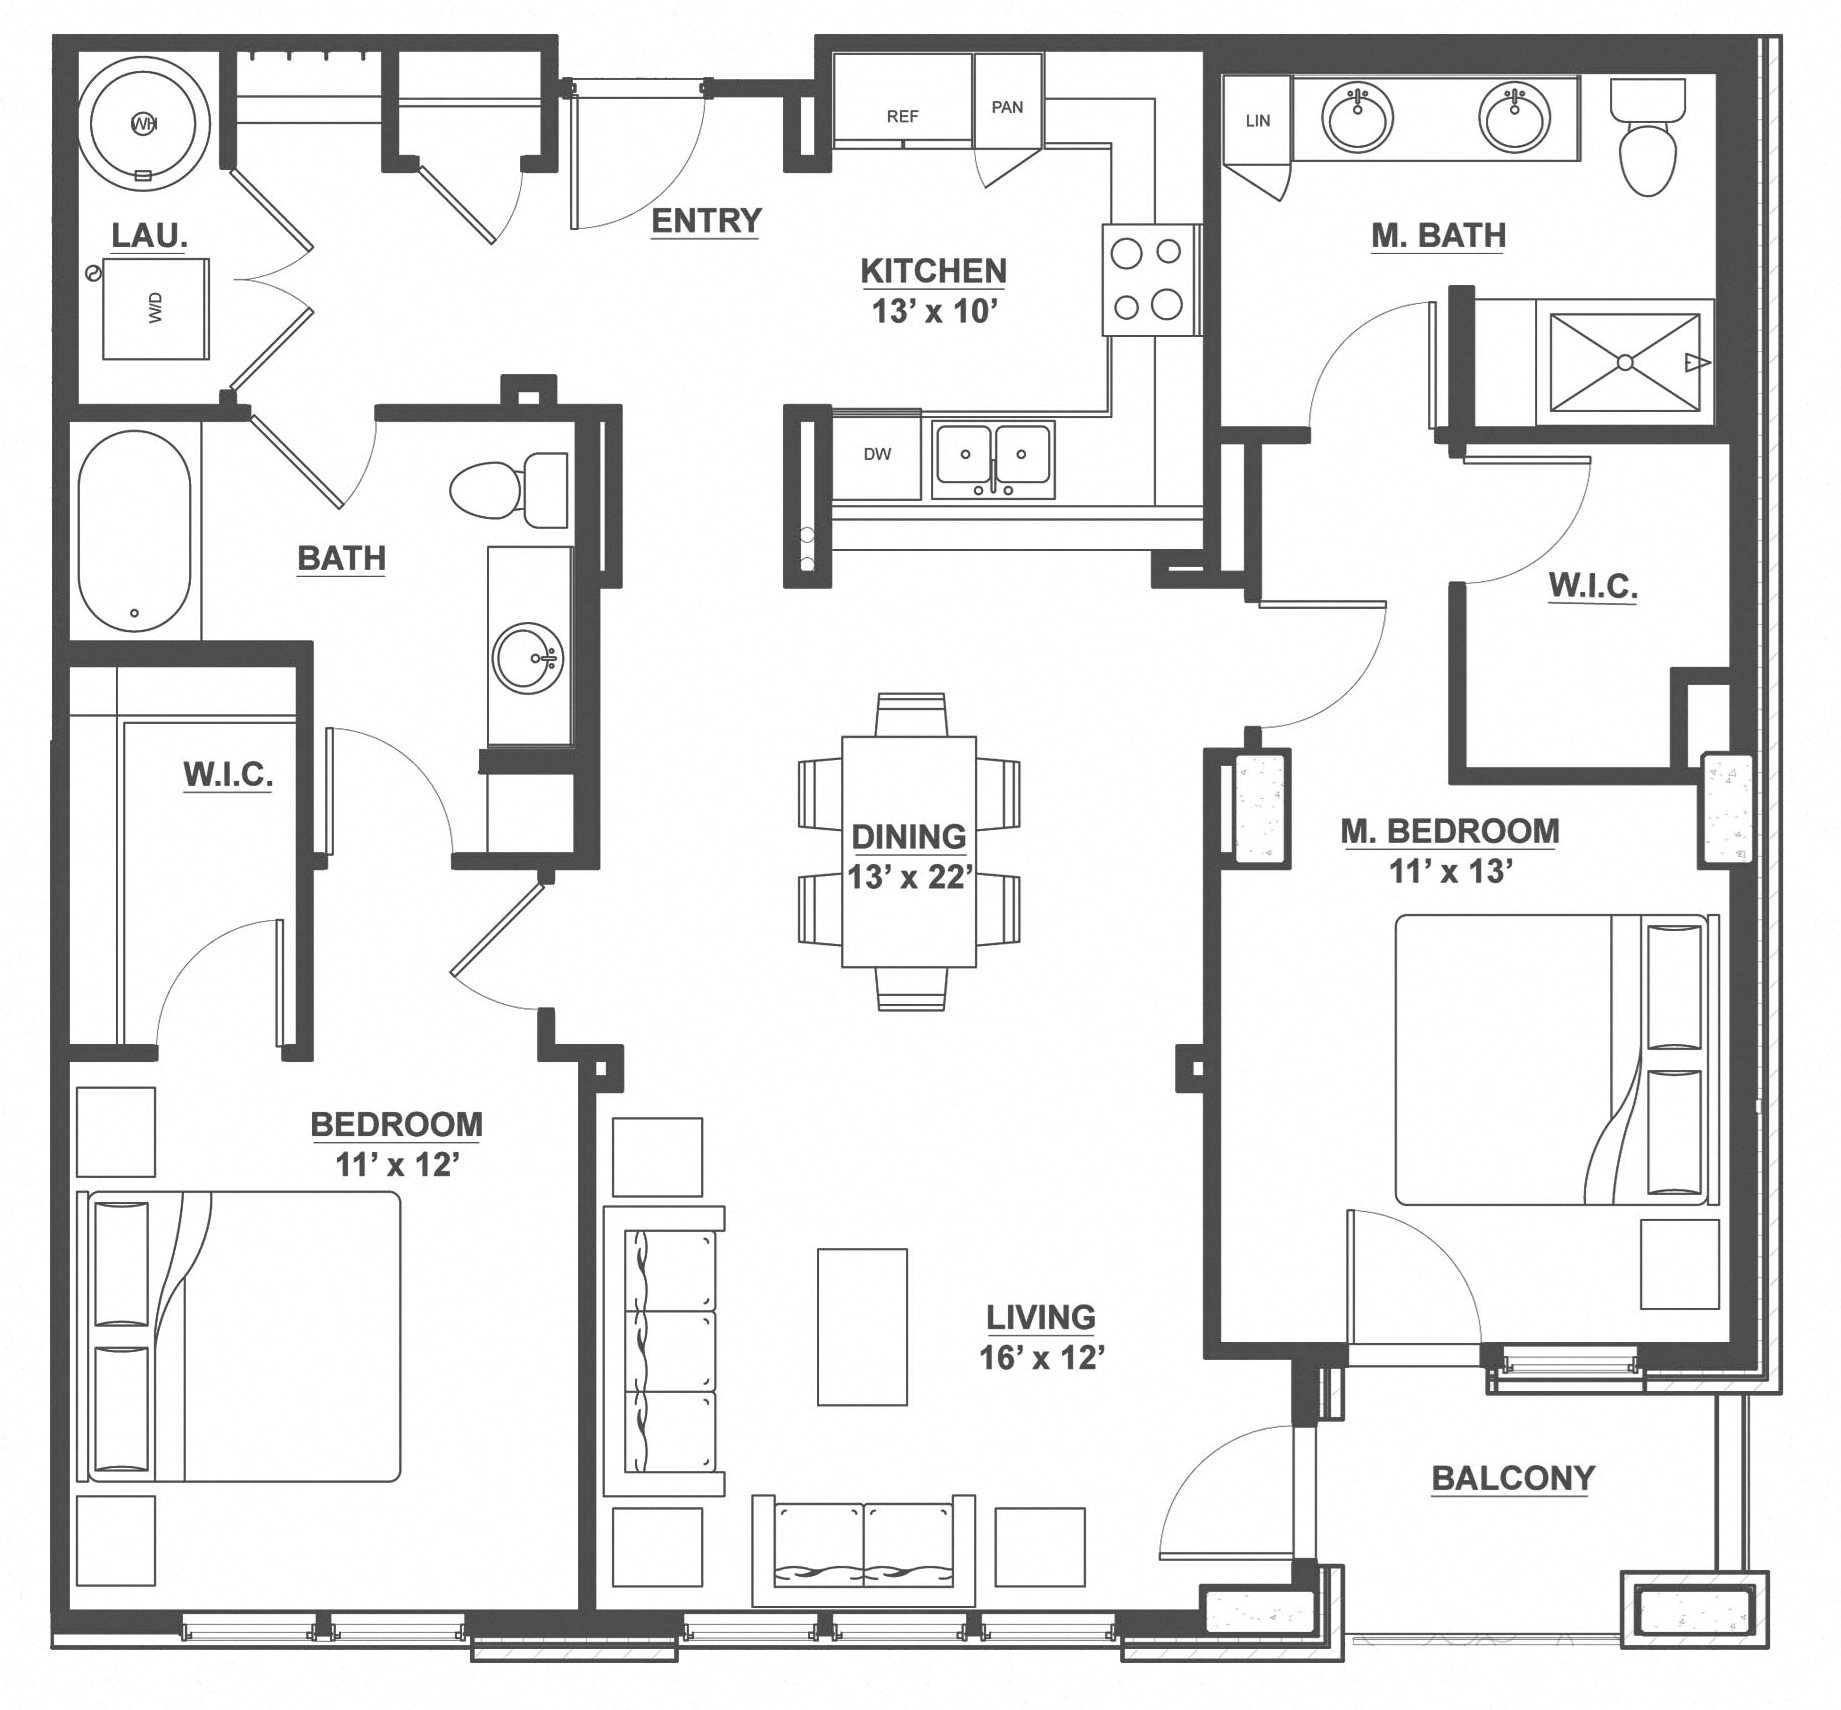 Floor Plans of Kent Place Residences in Cherry Hills, CO